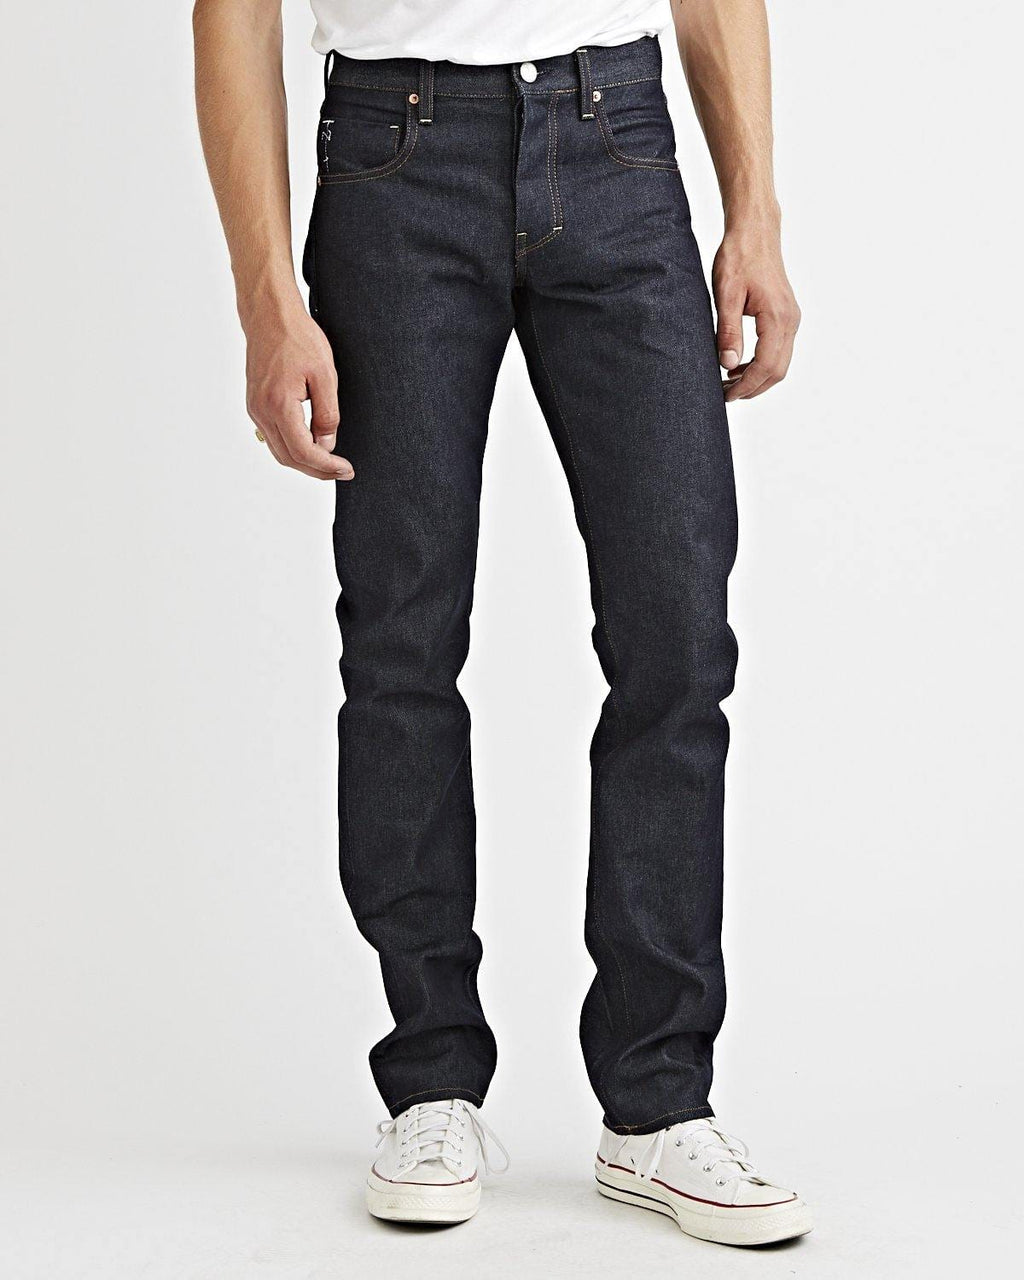 Men's Jeans & Denim | Made in Italy and Japan |